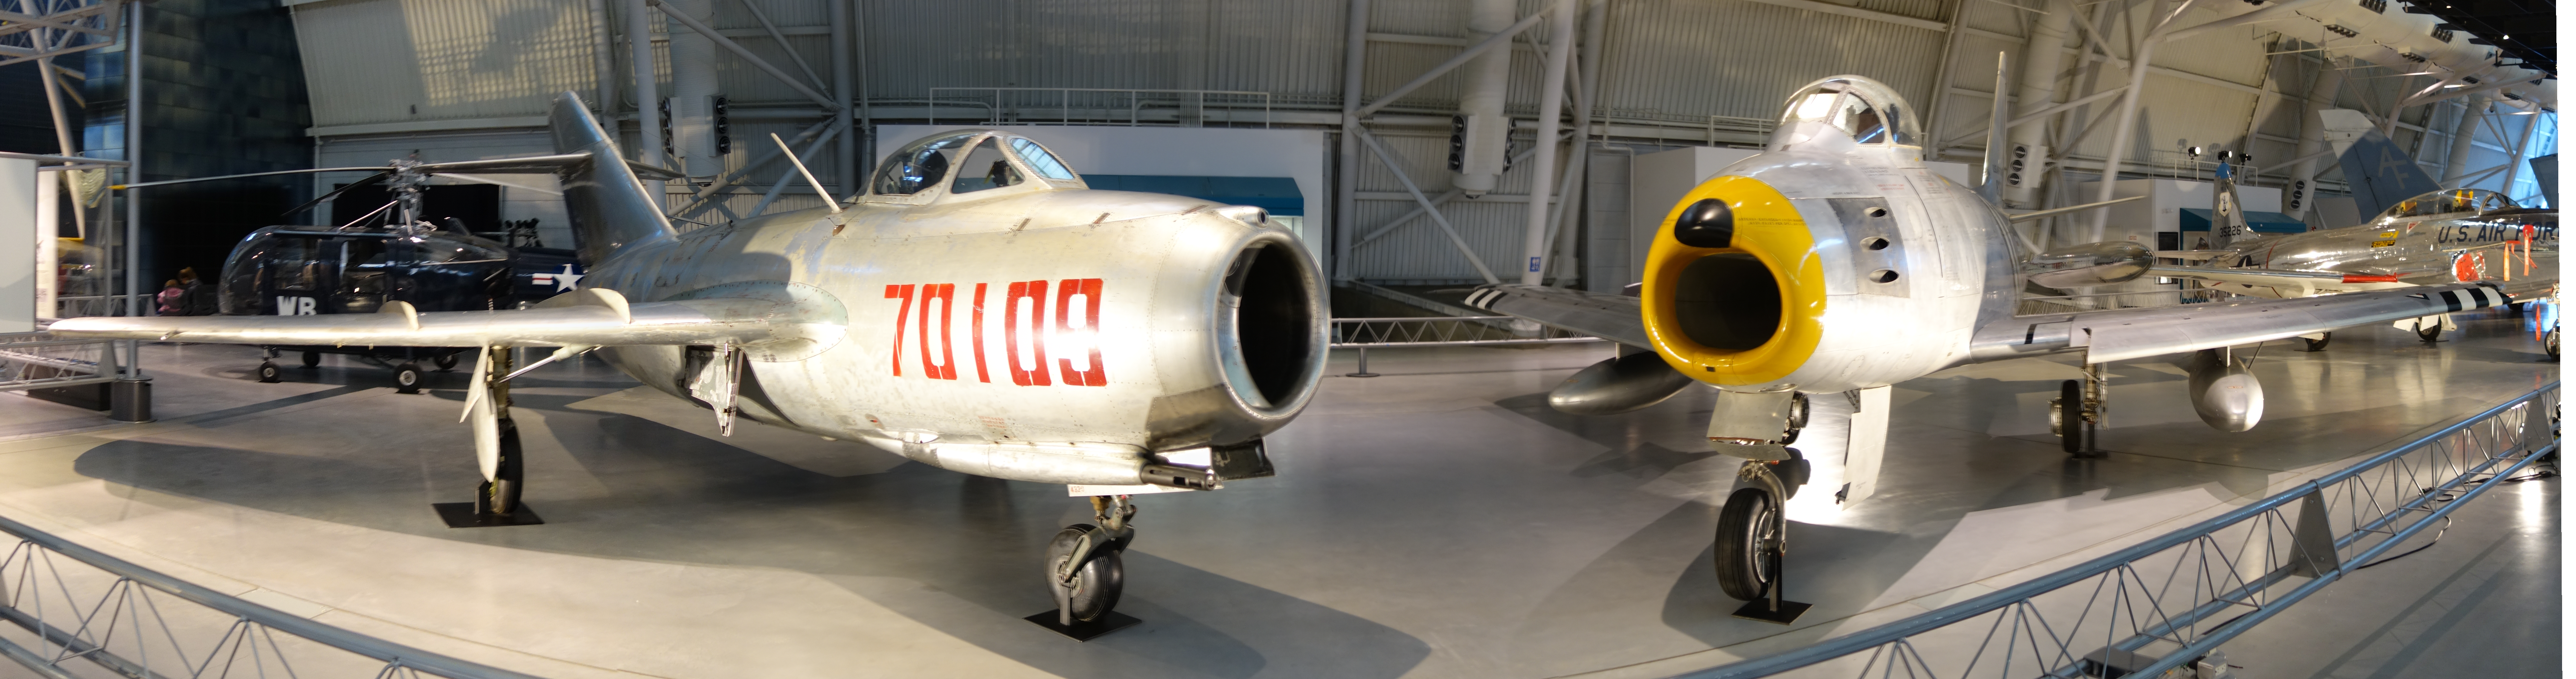 A Mig-15 and F-86 Sabre on display side by side.